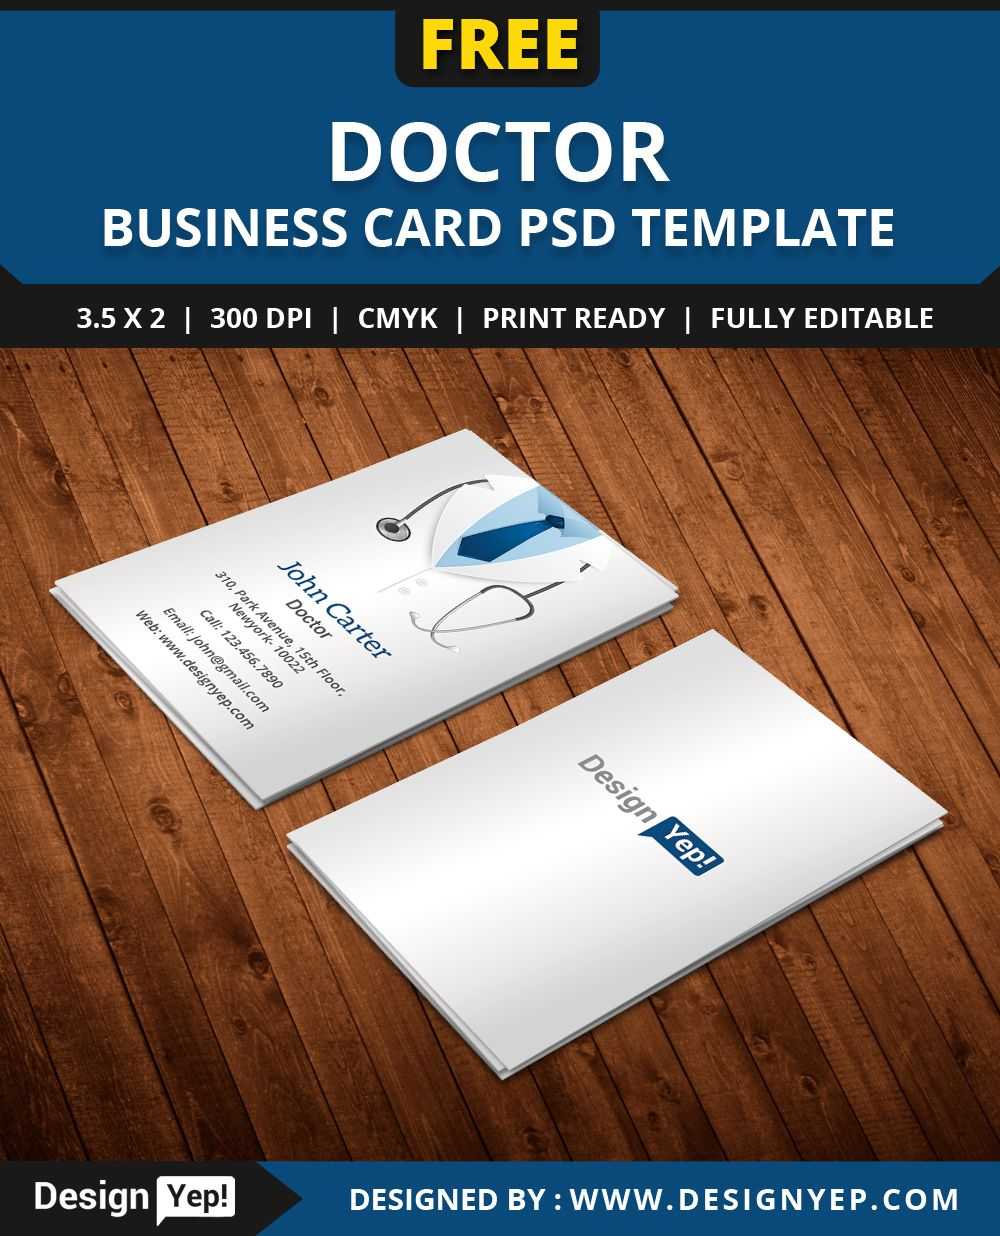 Free Doctor Business Card Template Psd | Free Business Card For Medical Business Cards Templates Free